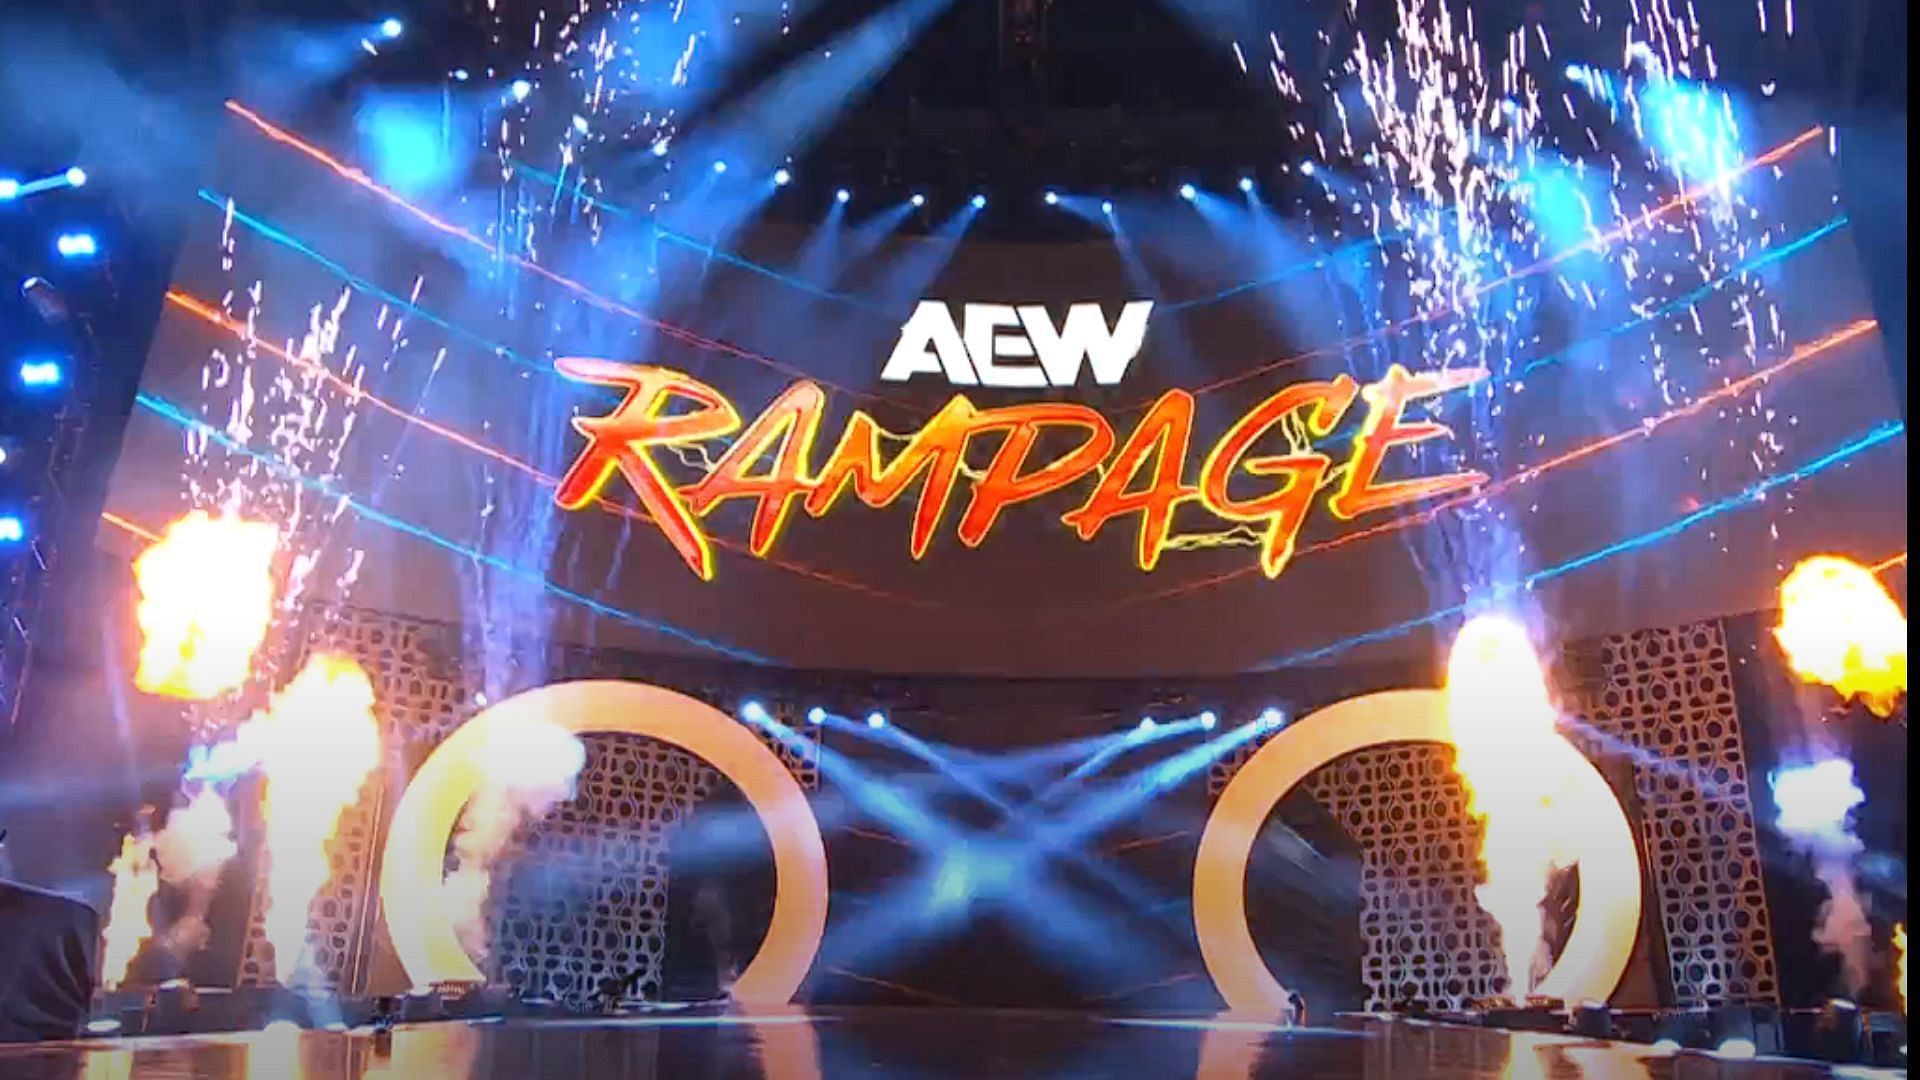 AEW Rampage is the weekly Friday show of All Elite Wrestling [Photo courtesy of Triller TV